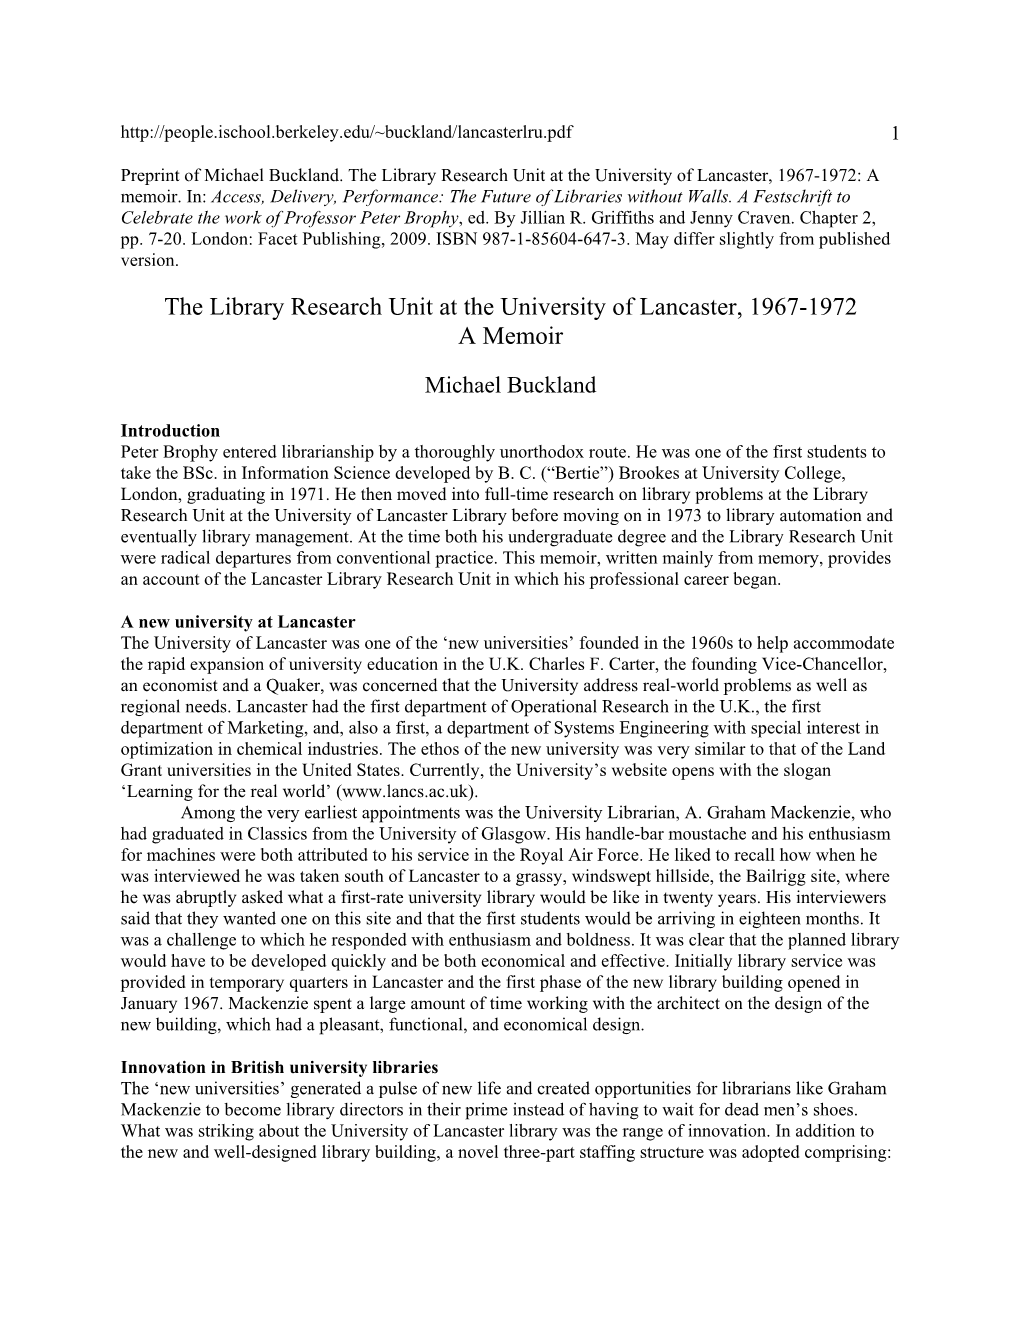 The Library Research Unit at the University of Lancaster, 1967-1972: a Memoir